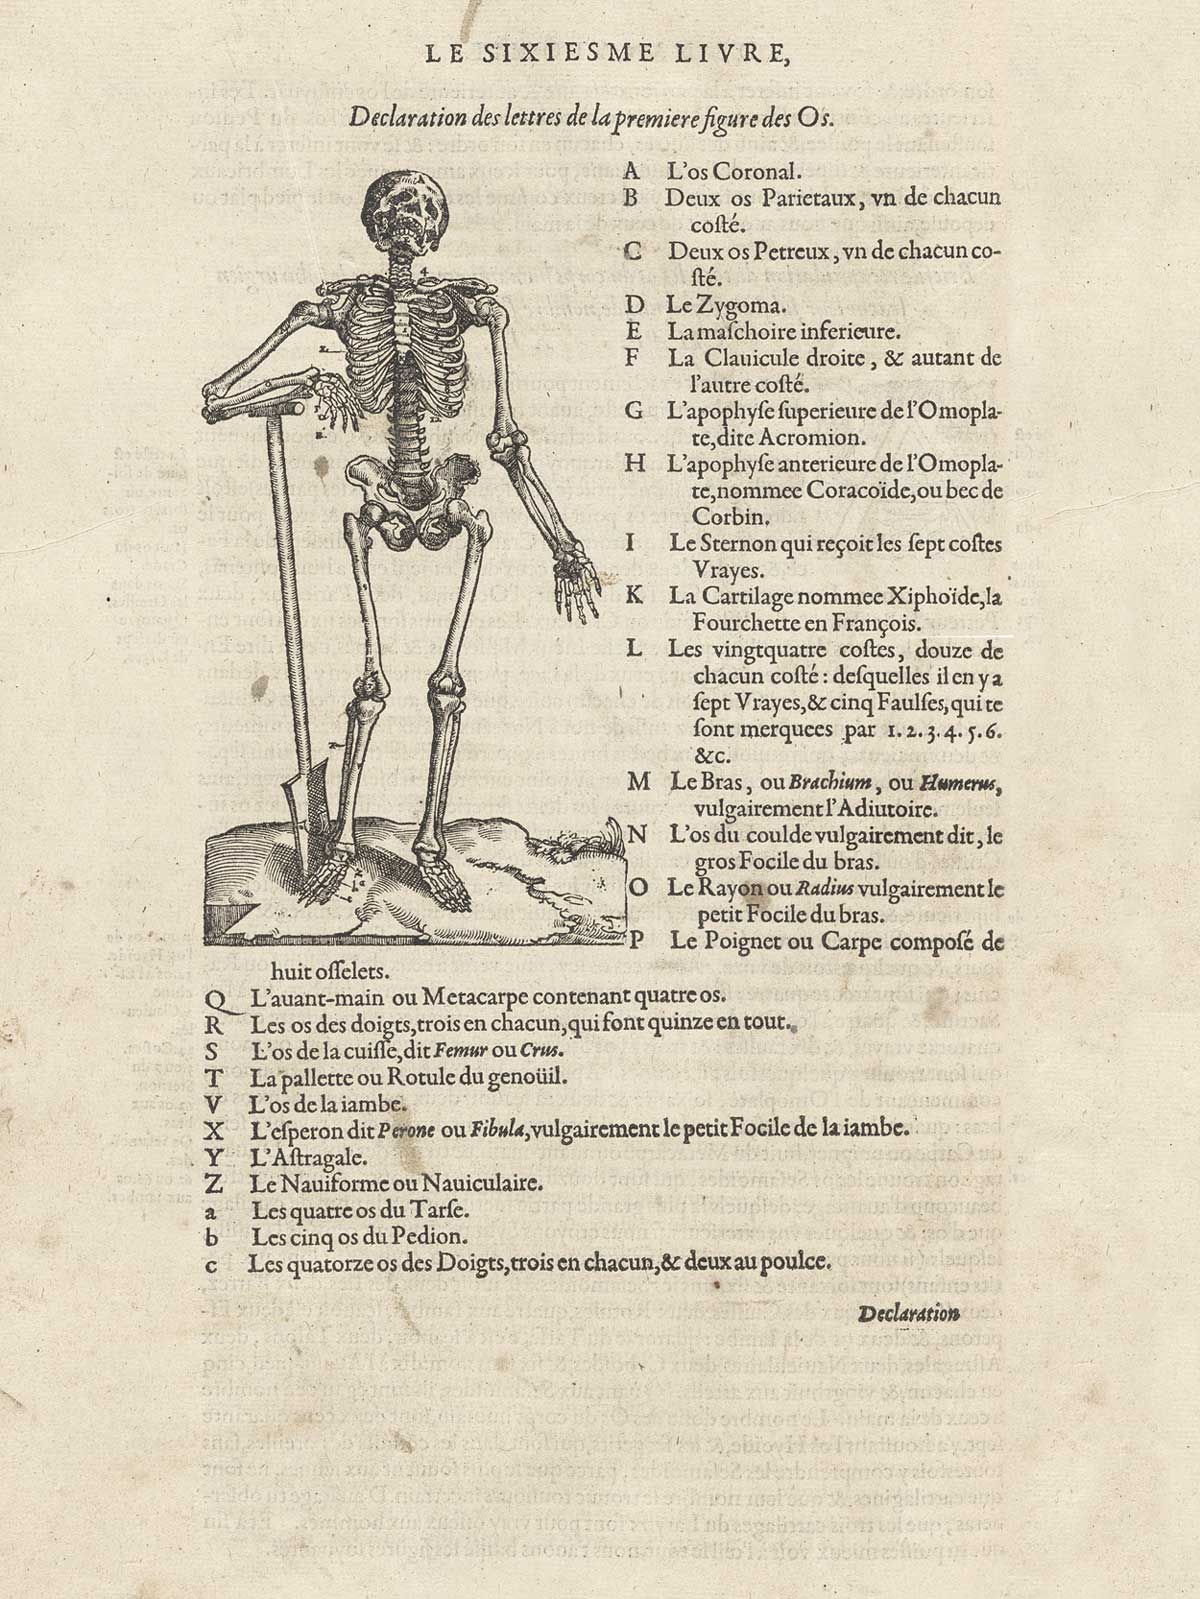 Woodcut of facing standing skeleton with a staff in his right hand, with typeset text in French to the right and below the figure, from Ambroise Paré’s Oeuvres, NLM Call no.: WZ 240 P227 1585.